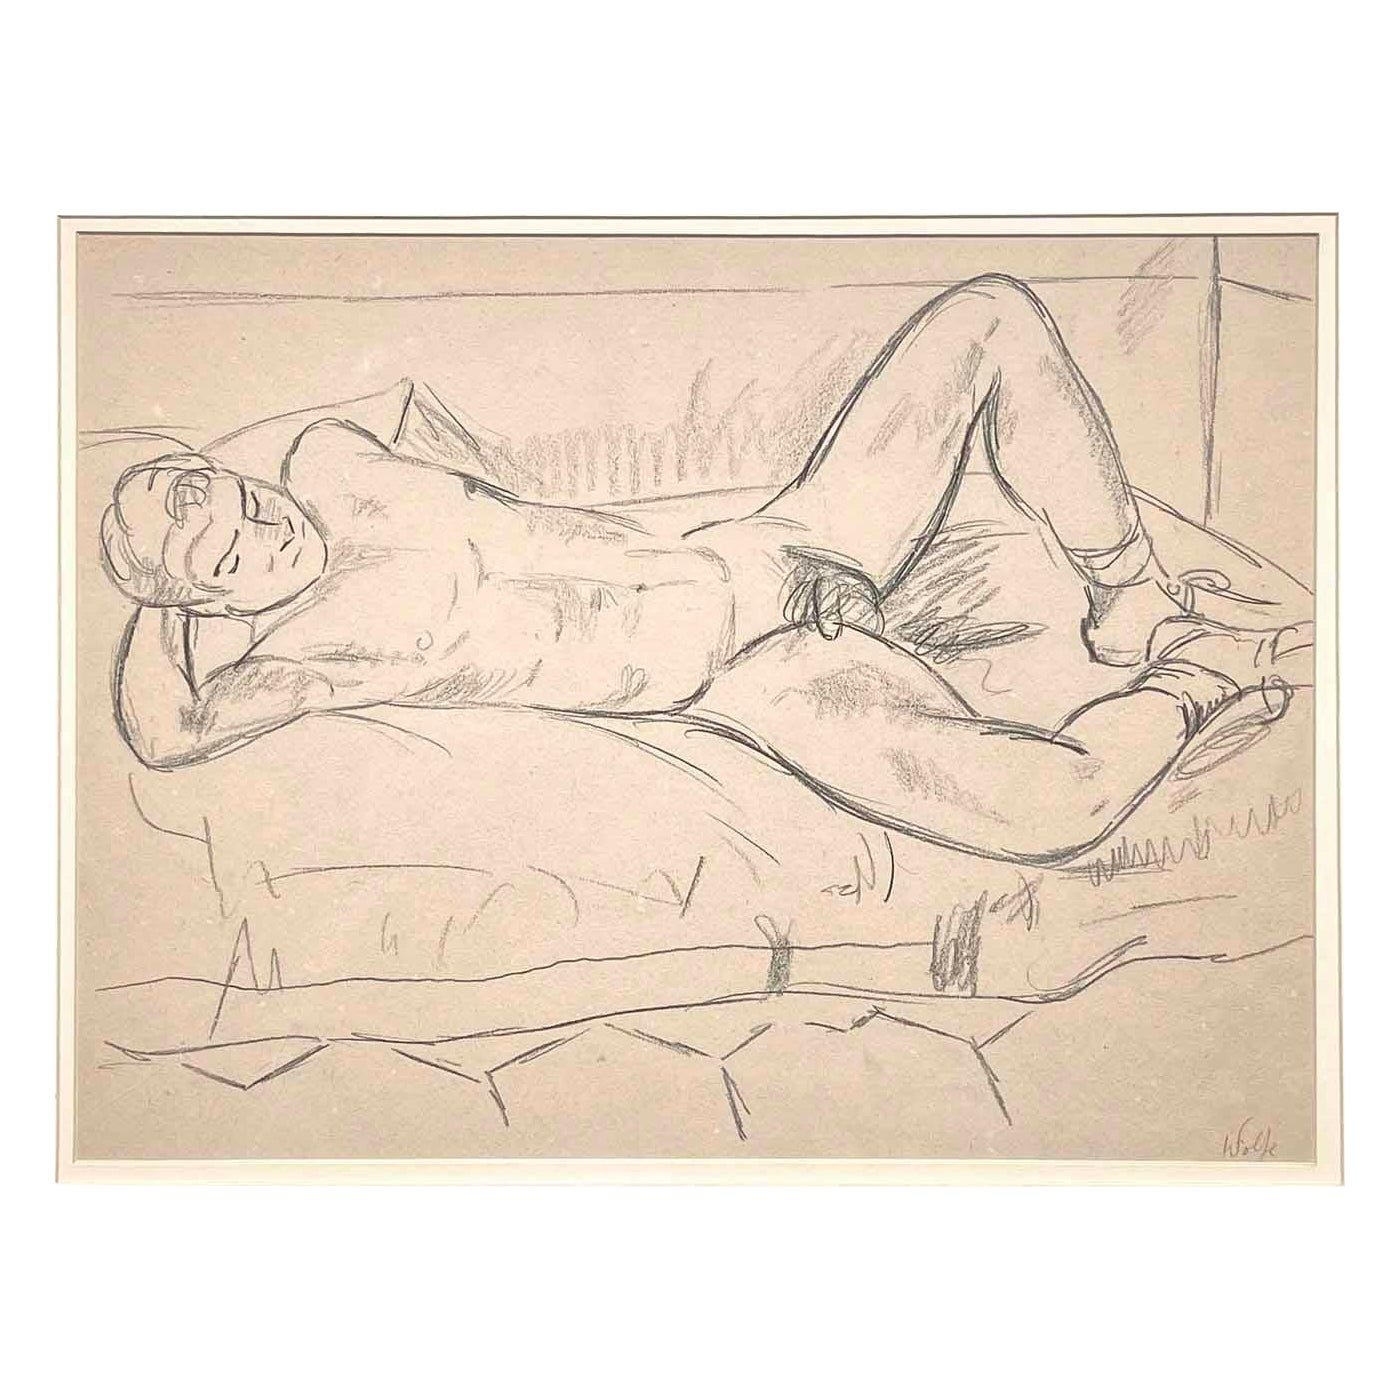 « Reclining Male Nude », important dessin d'Edward Wolfe, Duncan Grant's Circle